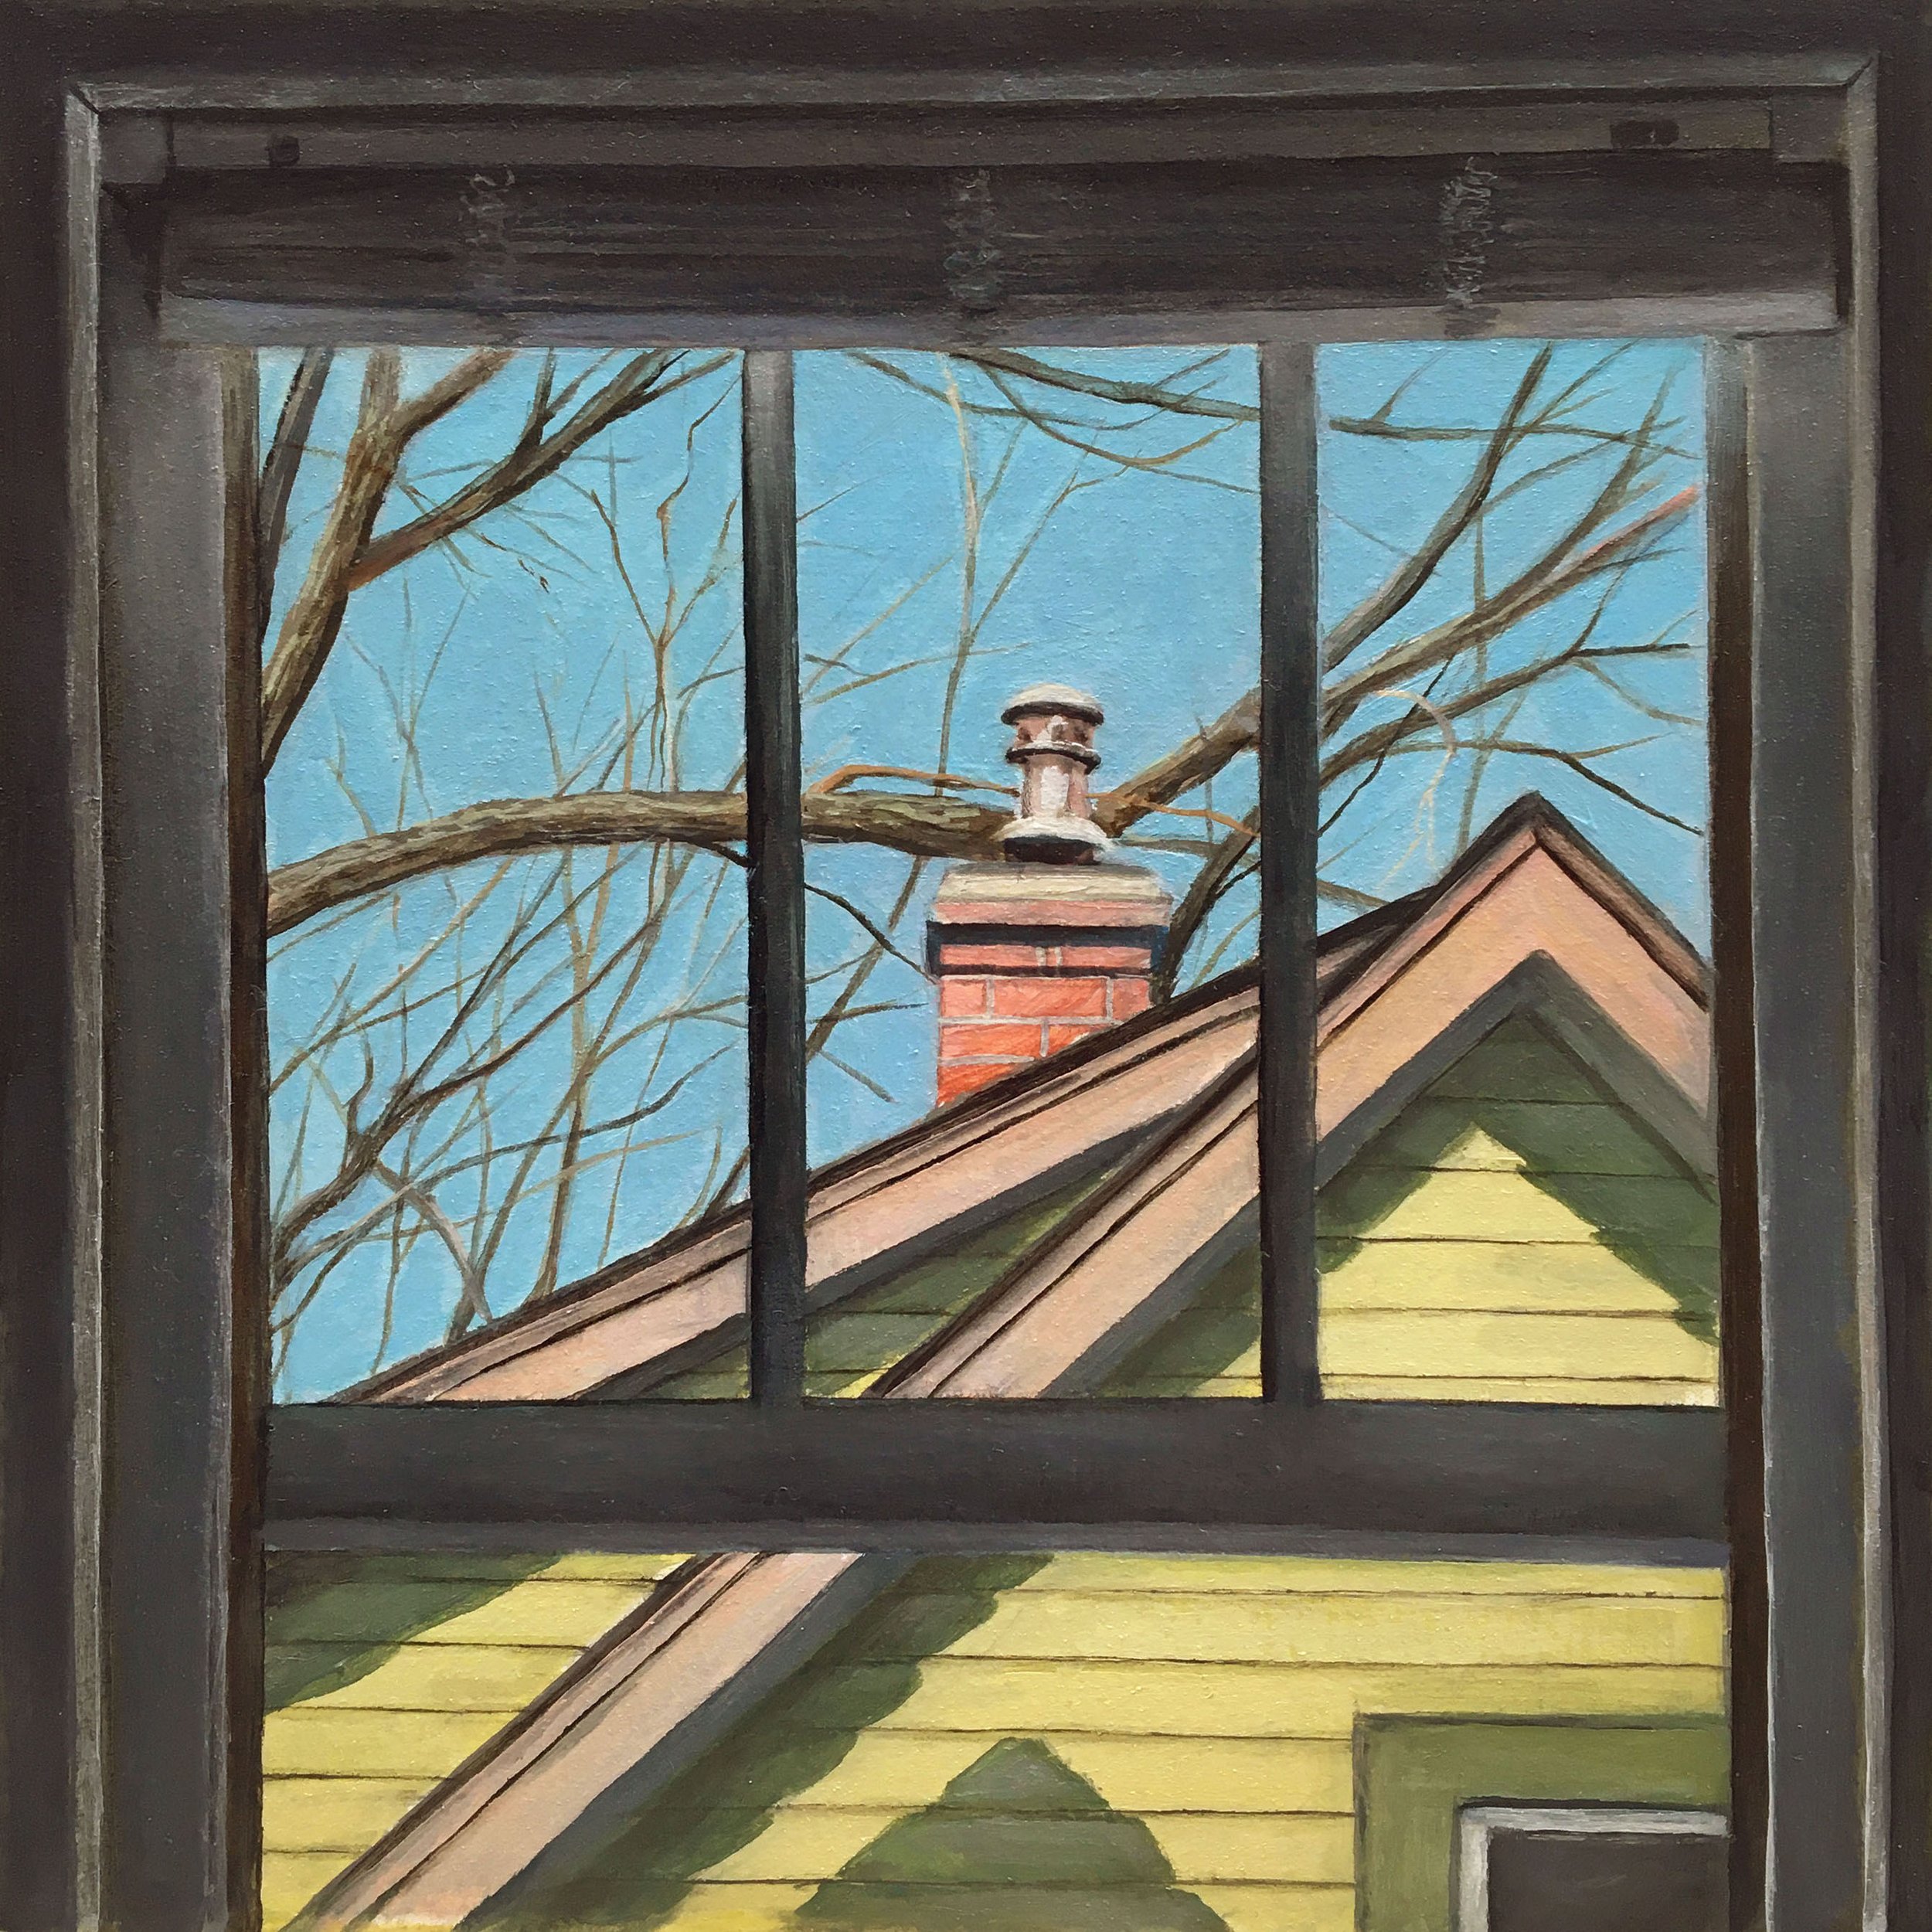   Northern Window View   2022  Oil on gessoed paper  7 x 7 inches   